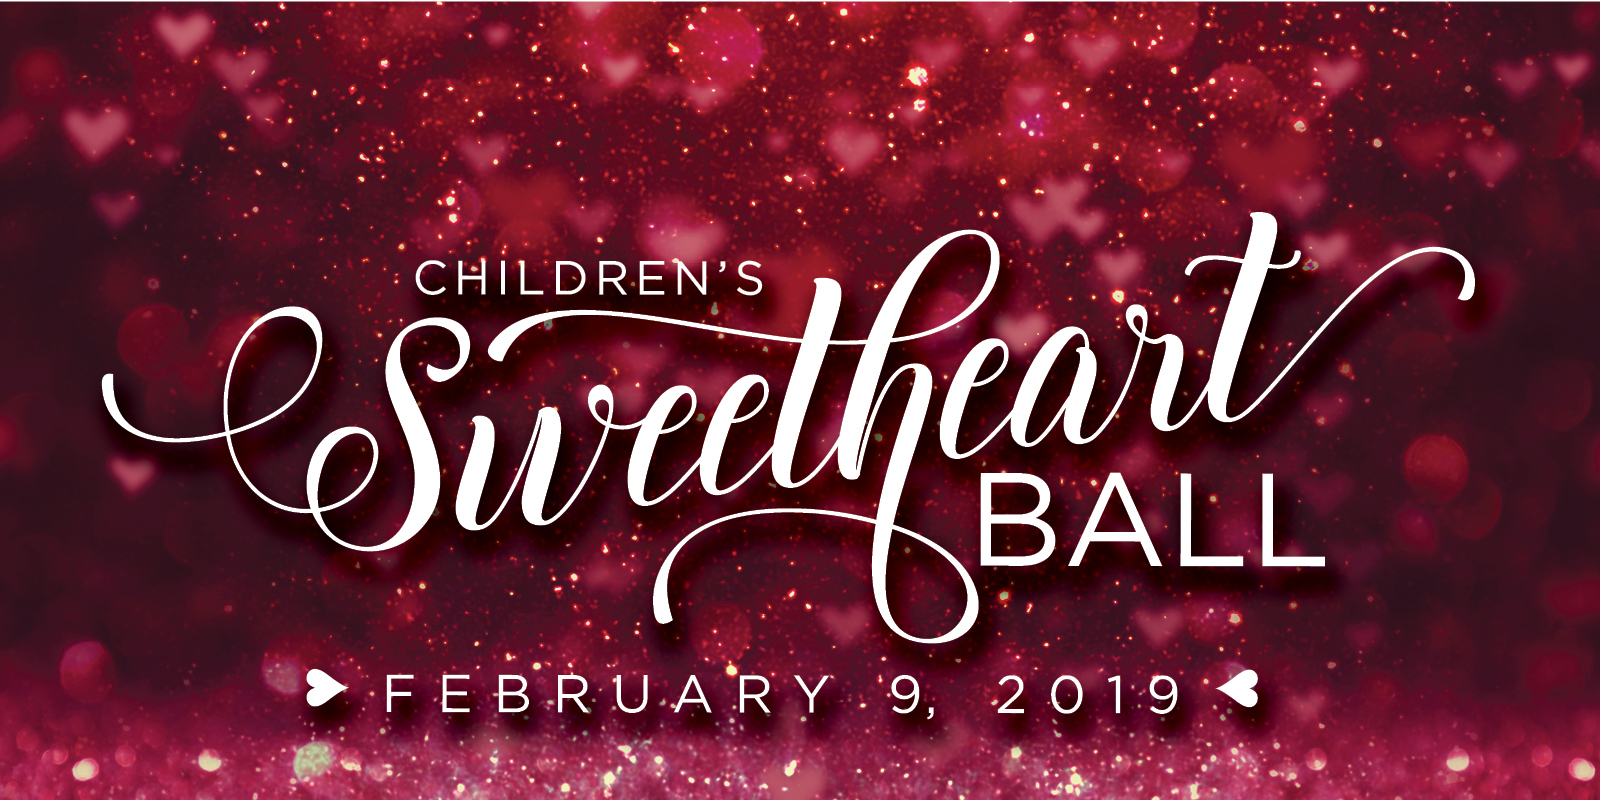 Children's Sweetheart Ball at Stepping Stones Museum in Norwalk, CT